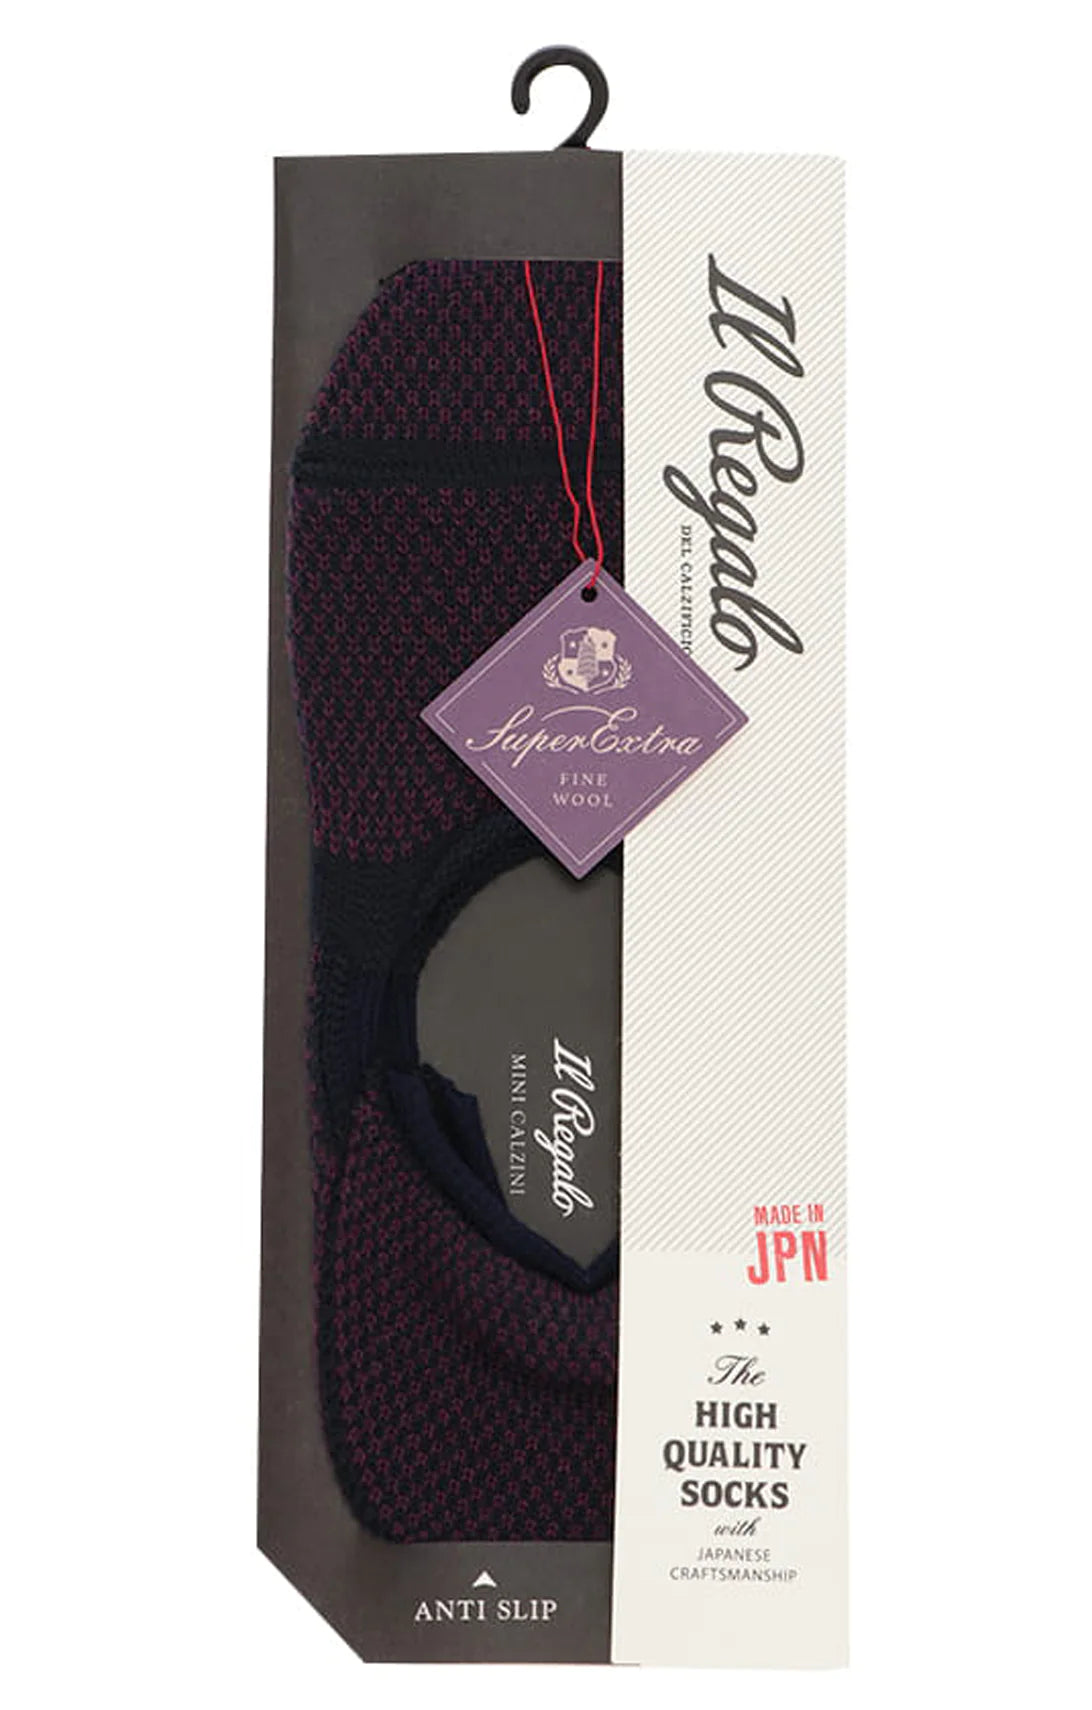 Il Regalo's Mesh Super Extra Fine Wool Liner Socks in Navy color in a package